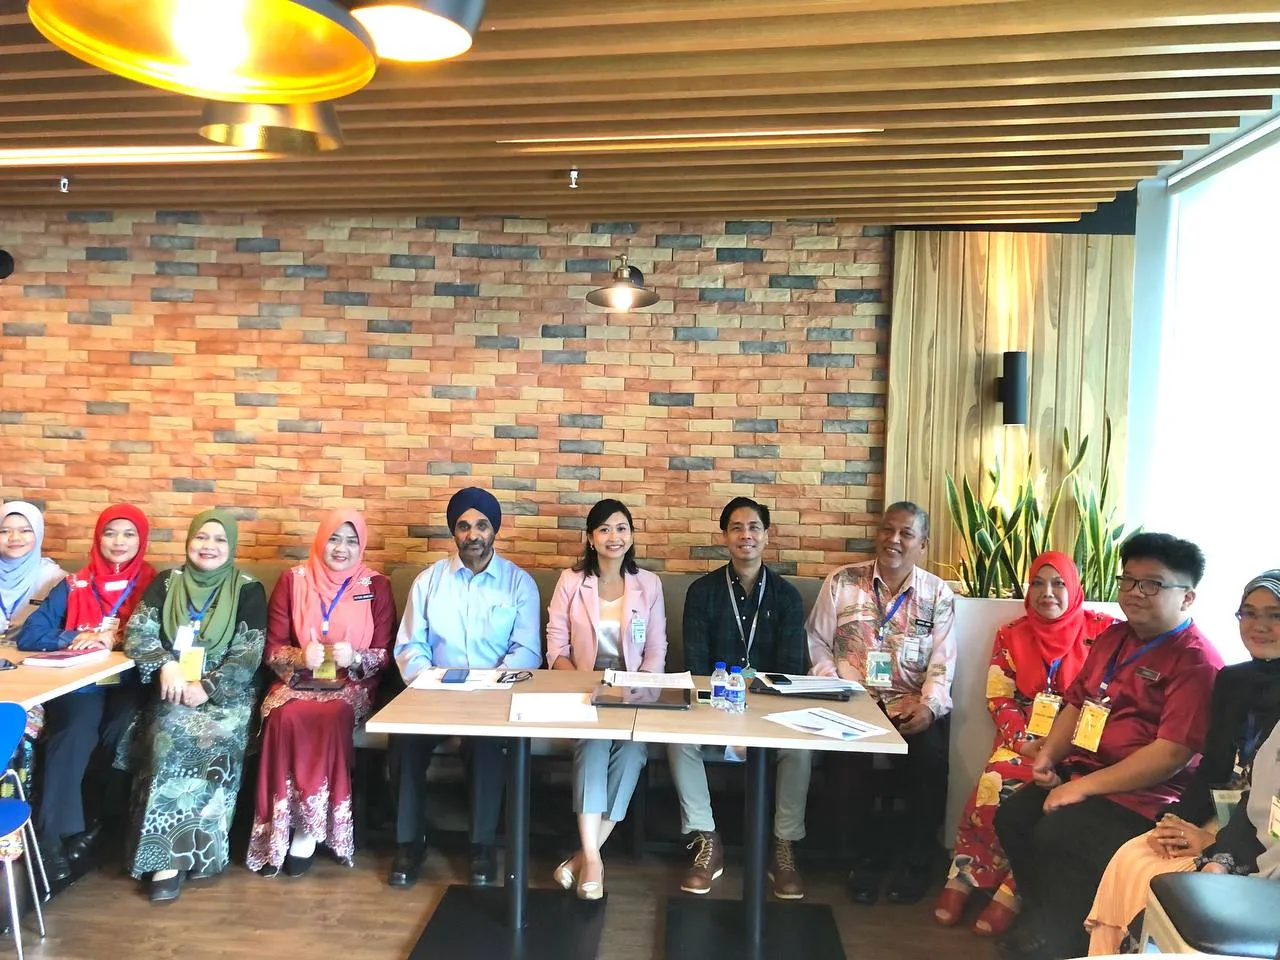 judging session- Maxis empowers education leaders through the Sekolah Super Conference